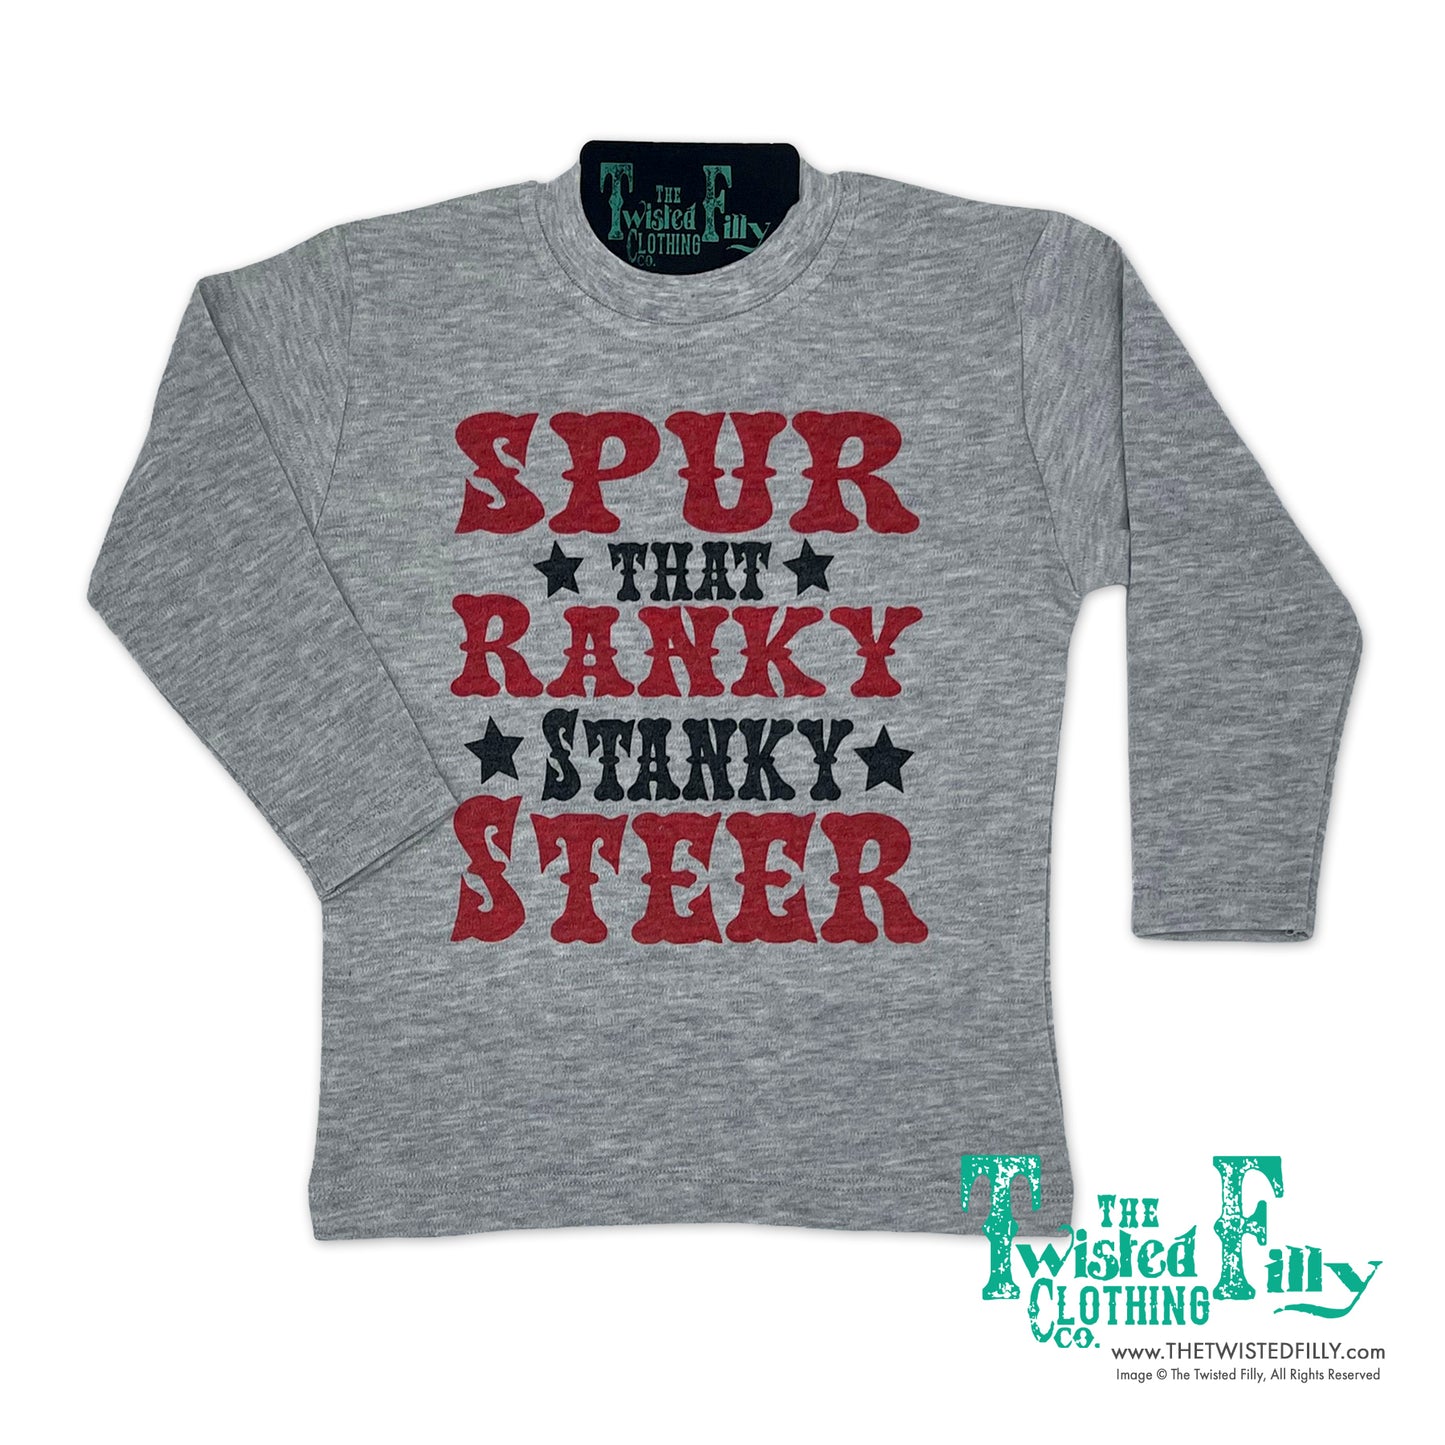 Spur That Ranky Stanky Steer - L/S Toddler Tee - Gray